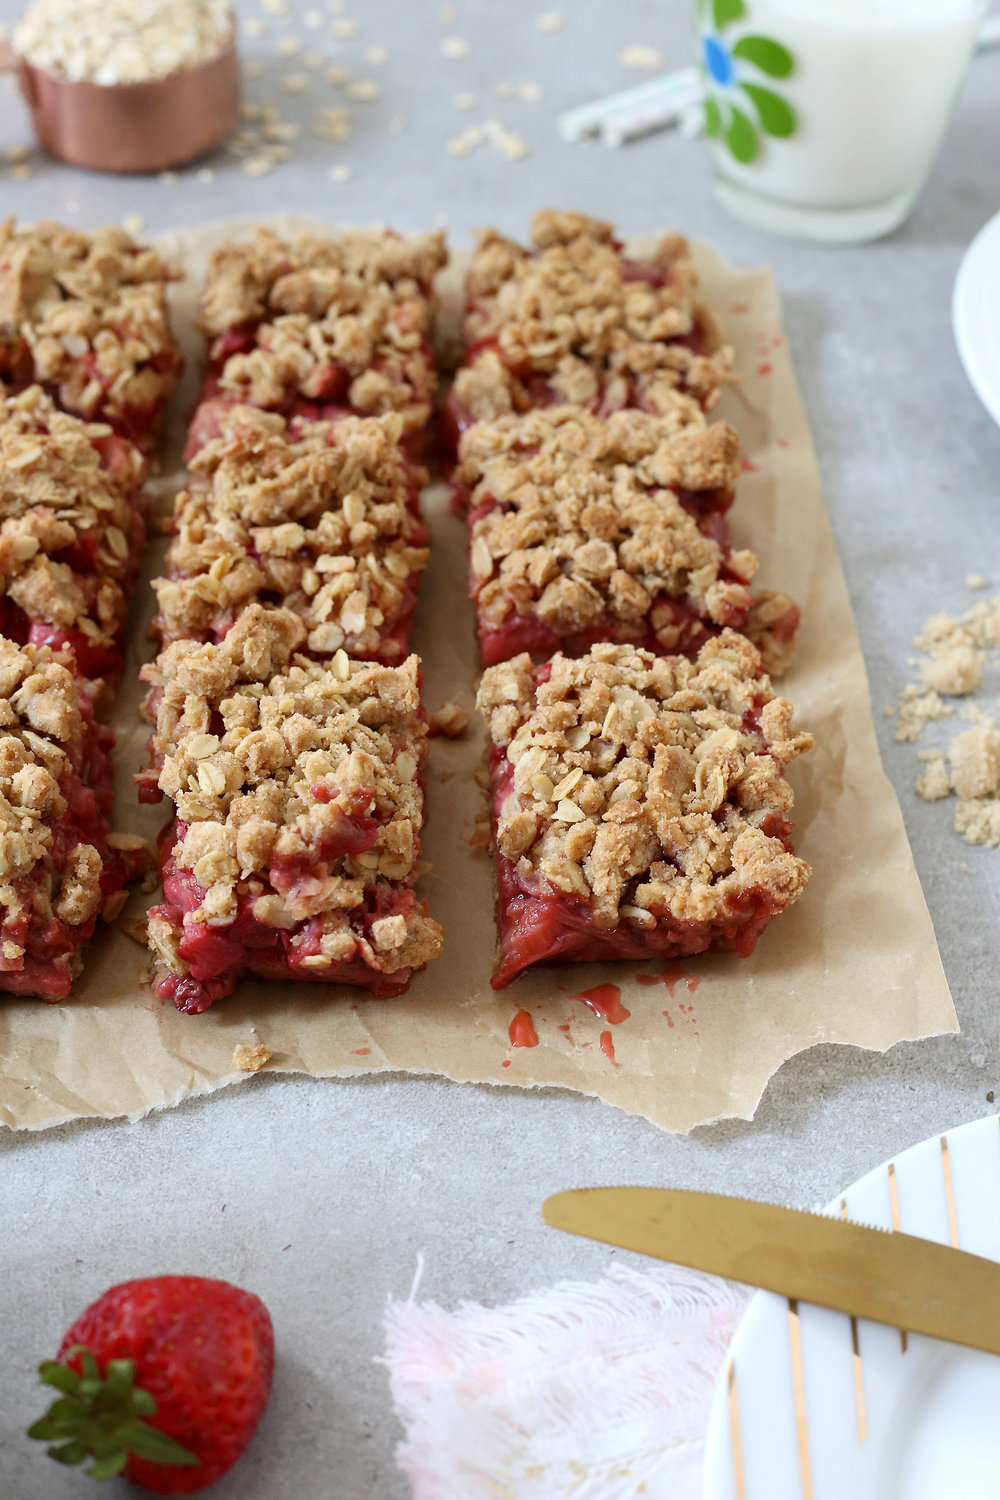 Looking for the perfect summer treat? Strawberry Rhubarb Bars are it! Grab the recipe: Unusually Lovely Blog